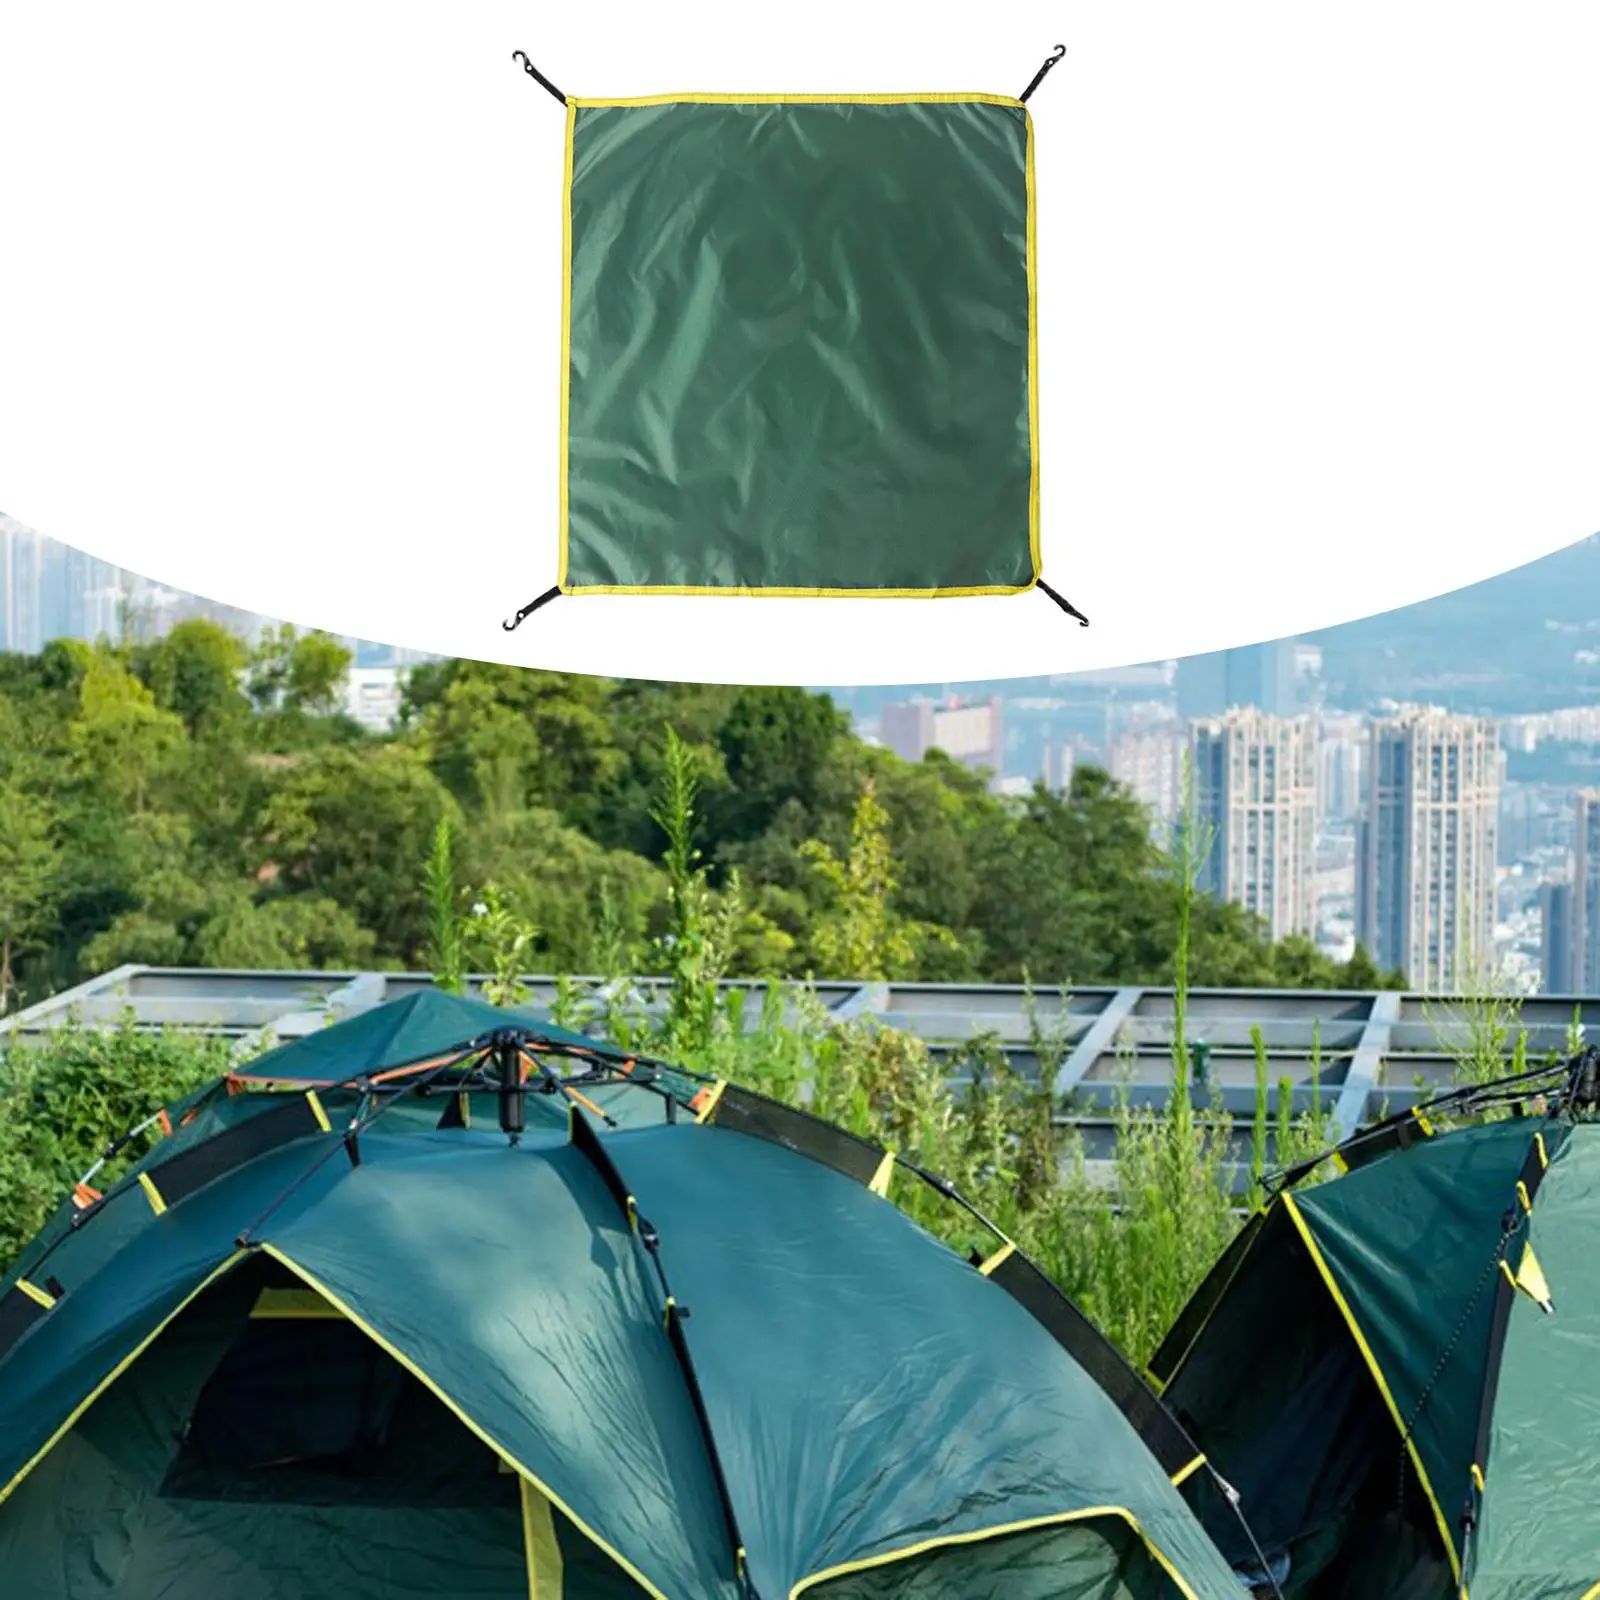 Rain Fly Accessory - Fits 3-4 Person Instant Tent (3.6 Foot X 3.6 Foot) Camping Tents, Rain Fly ONLY